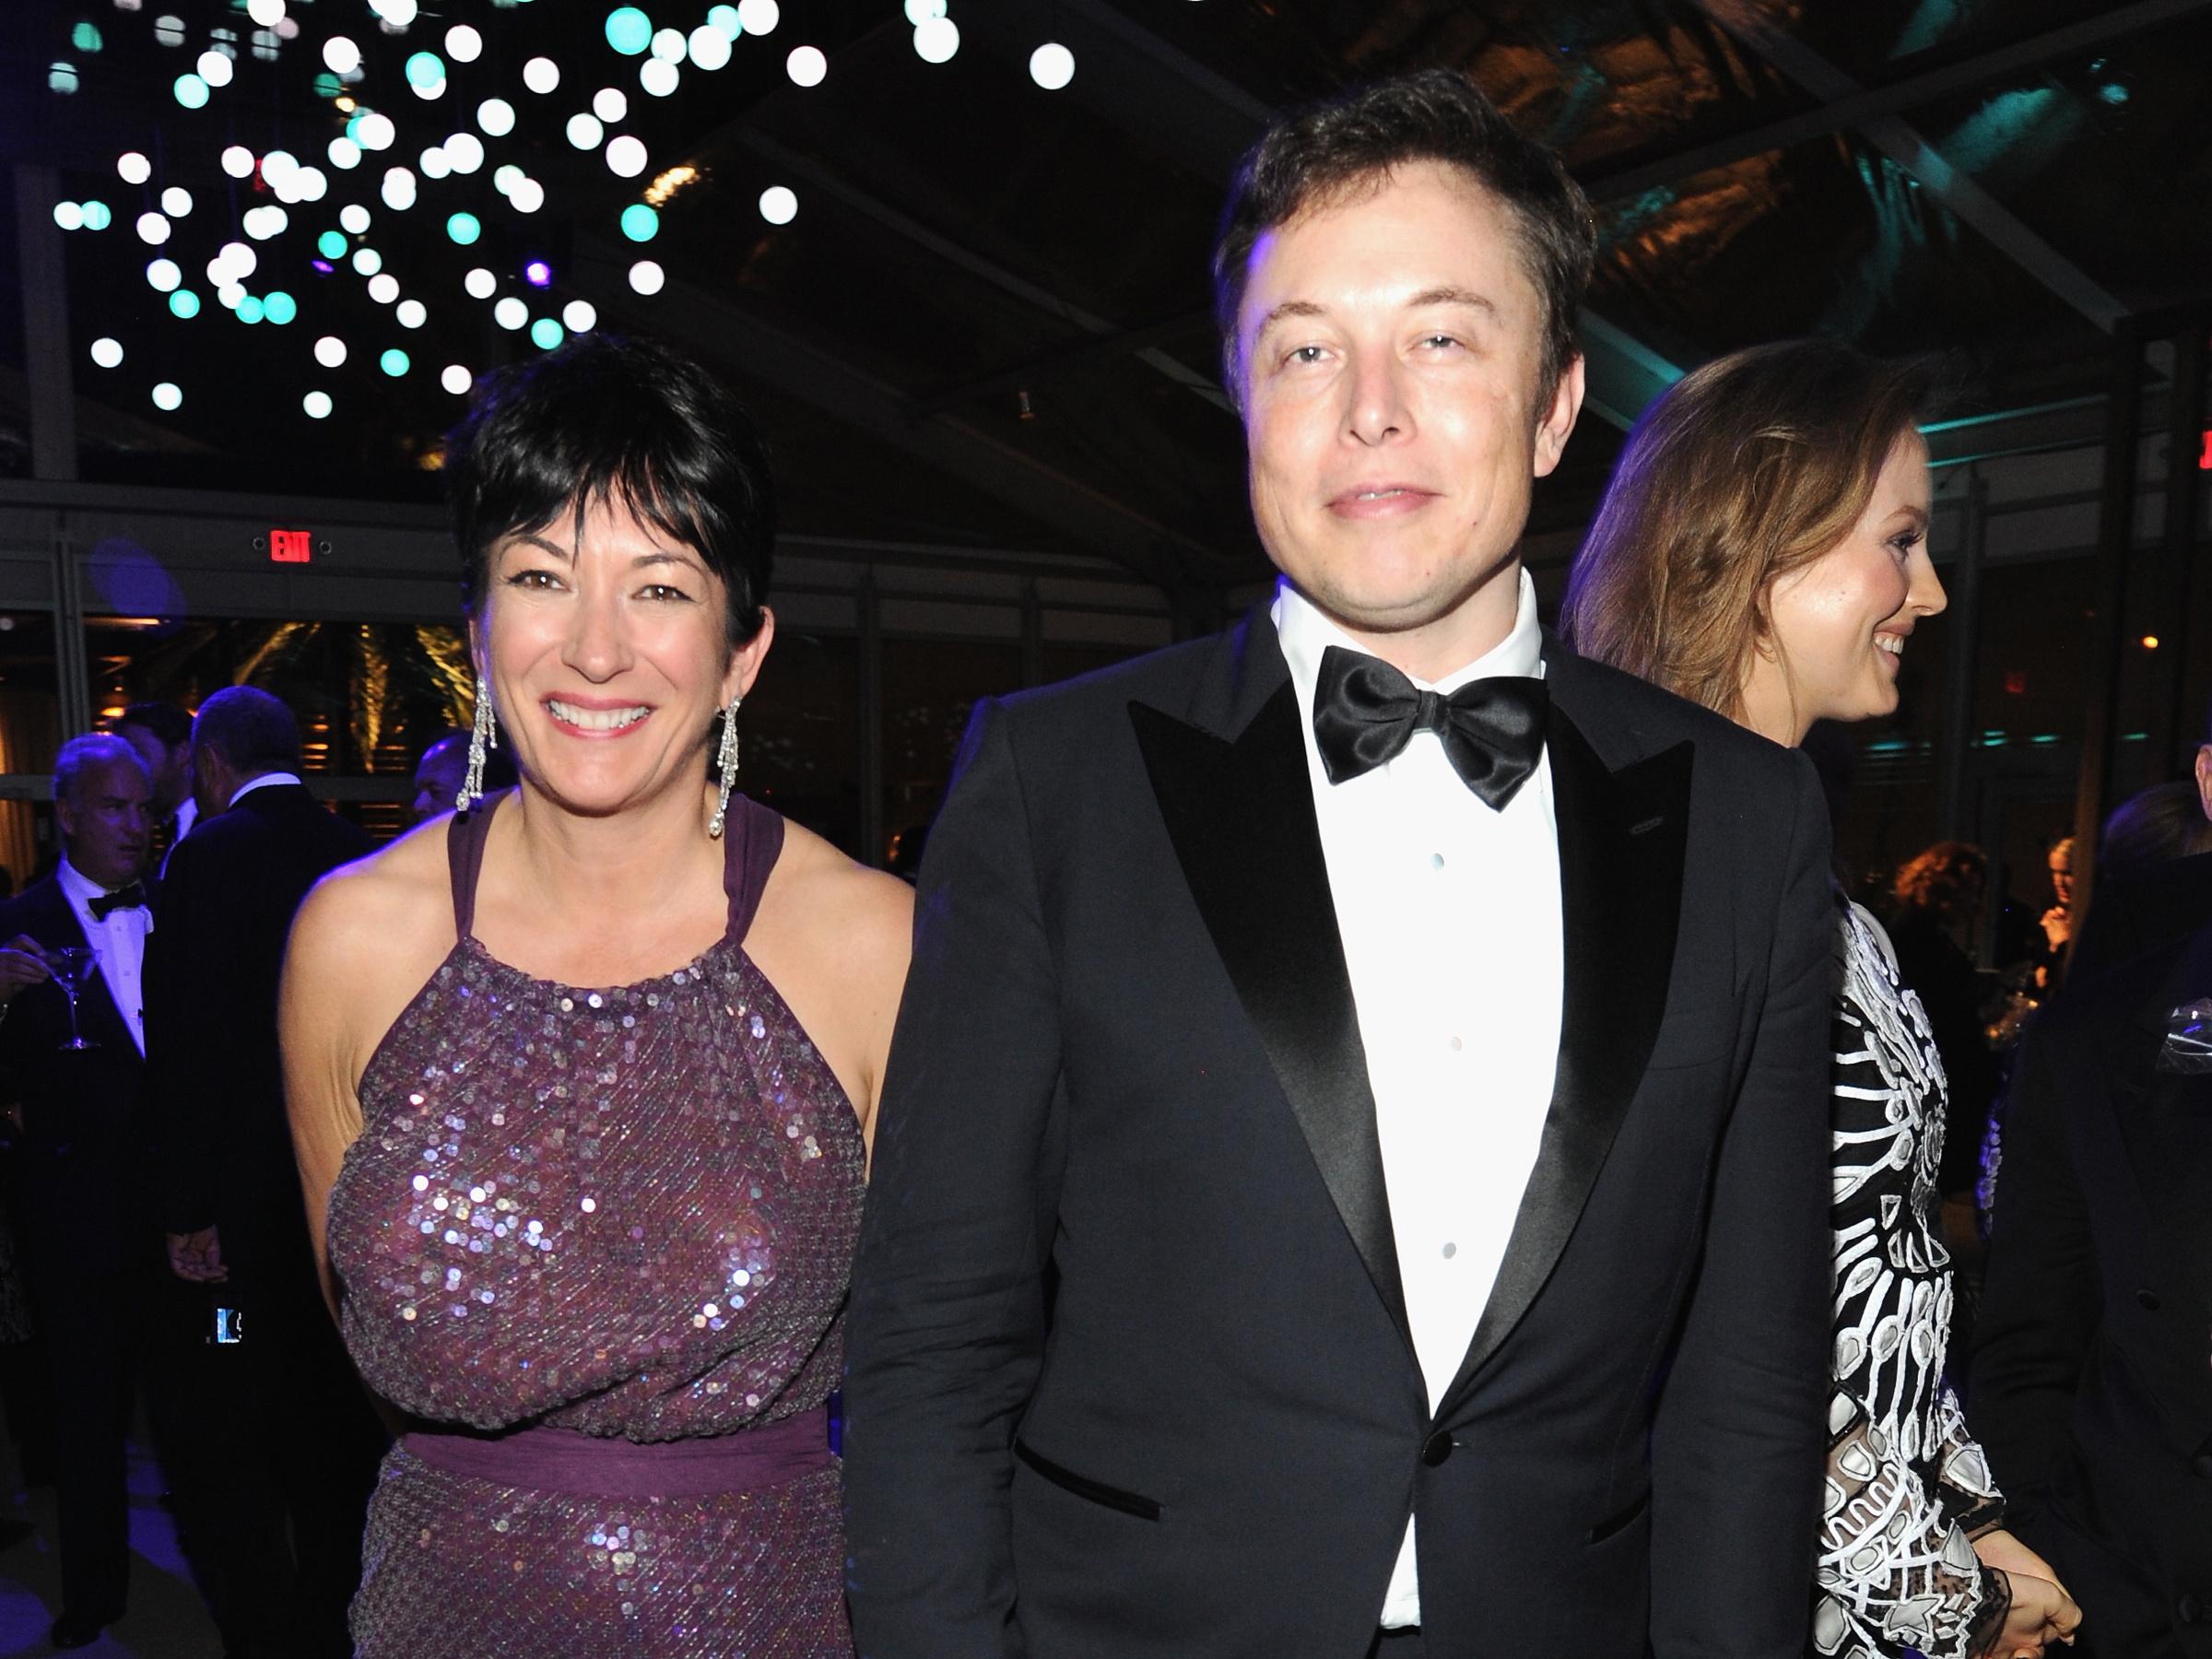 Ghislaine Maxwell Net Worth in 2020 and All You Need to Know - 64